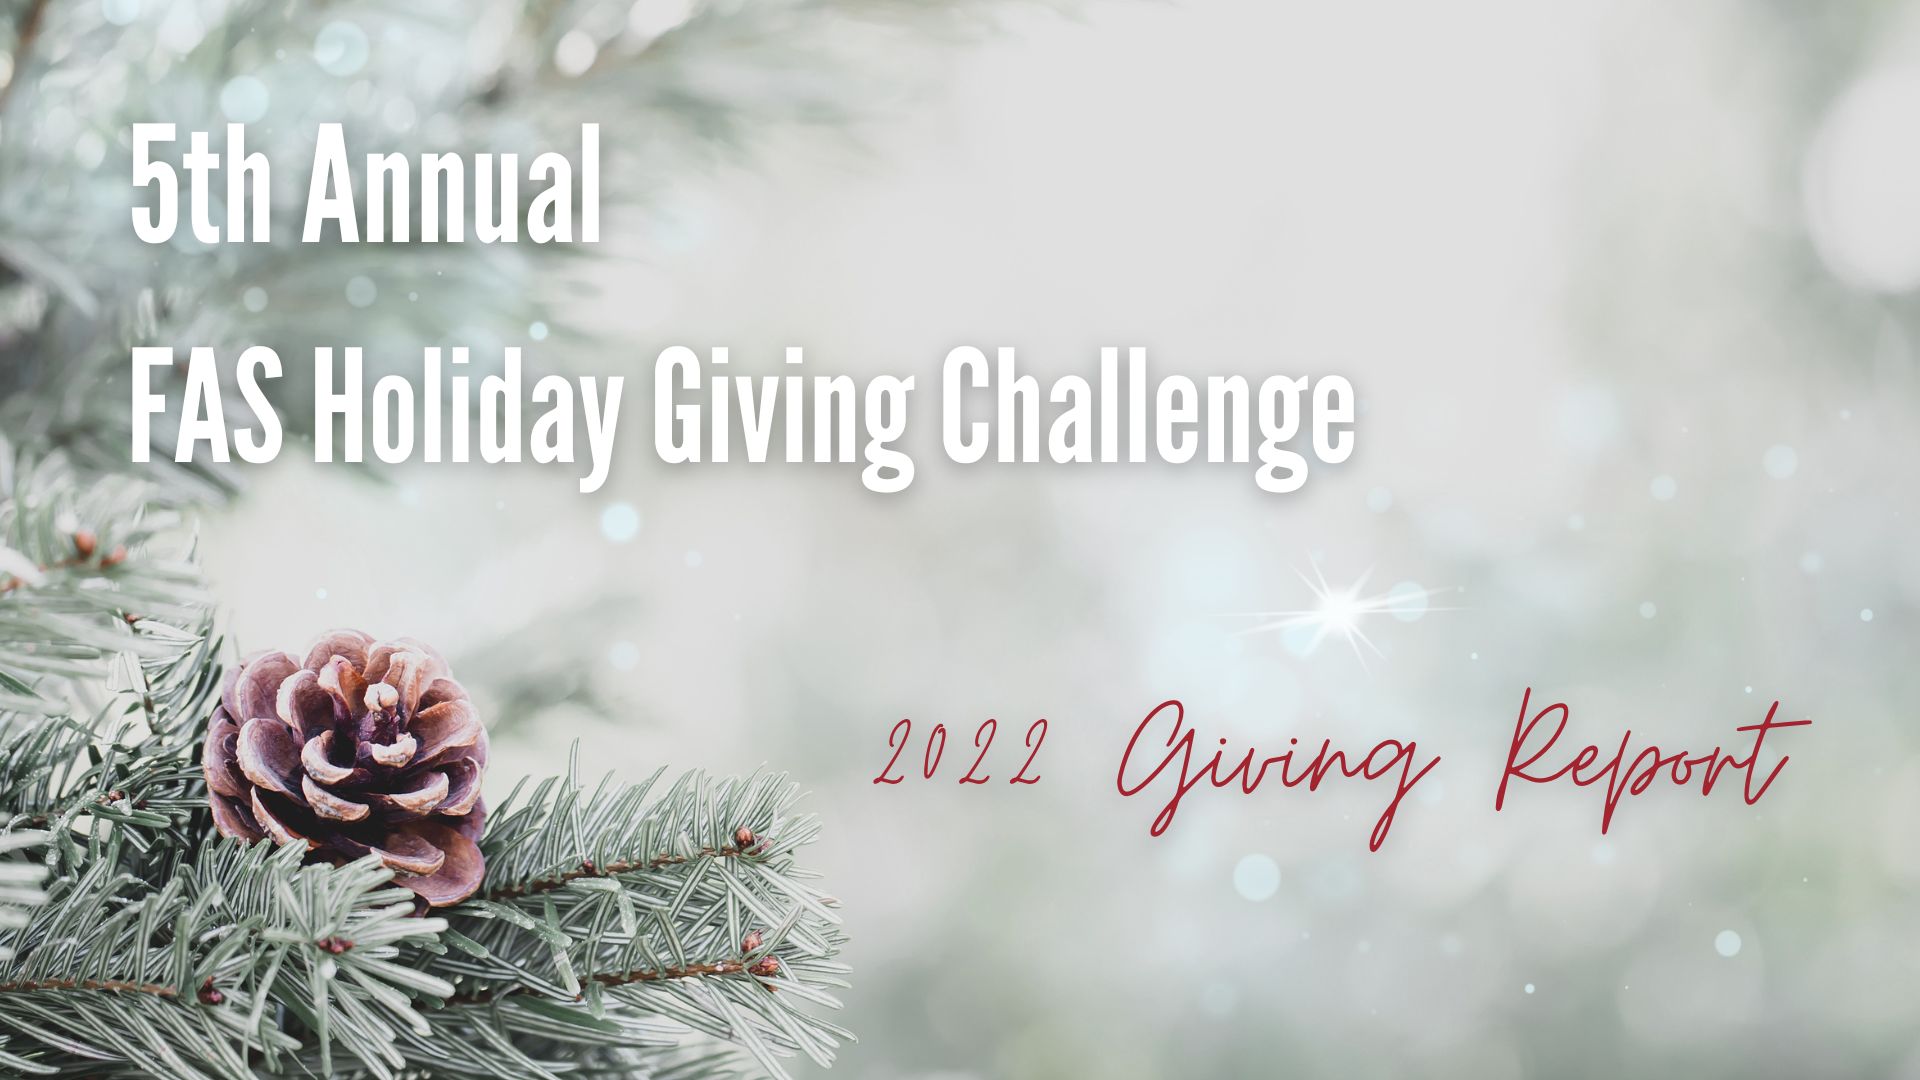 holiday giving challenge December 14th - 21st